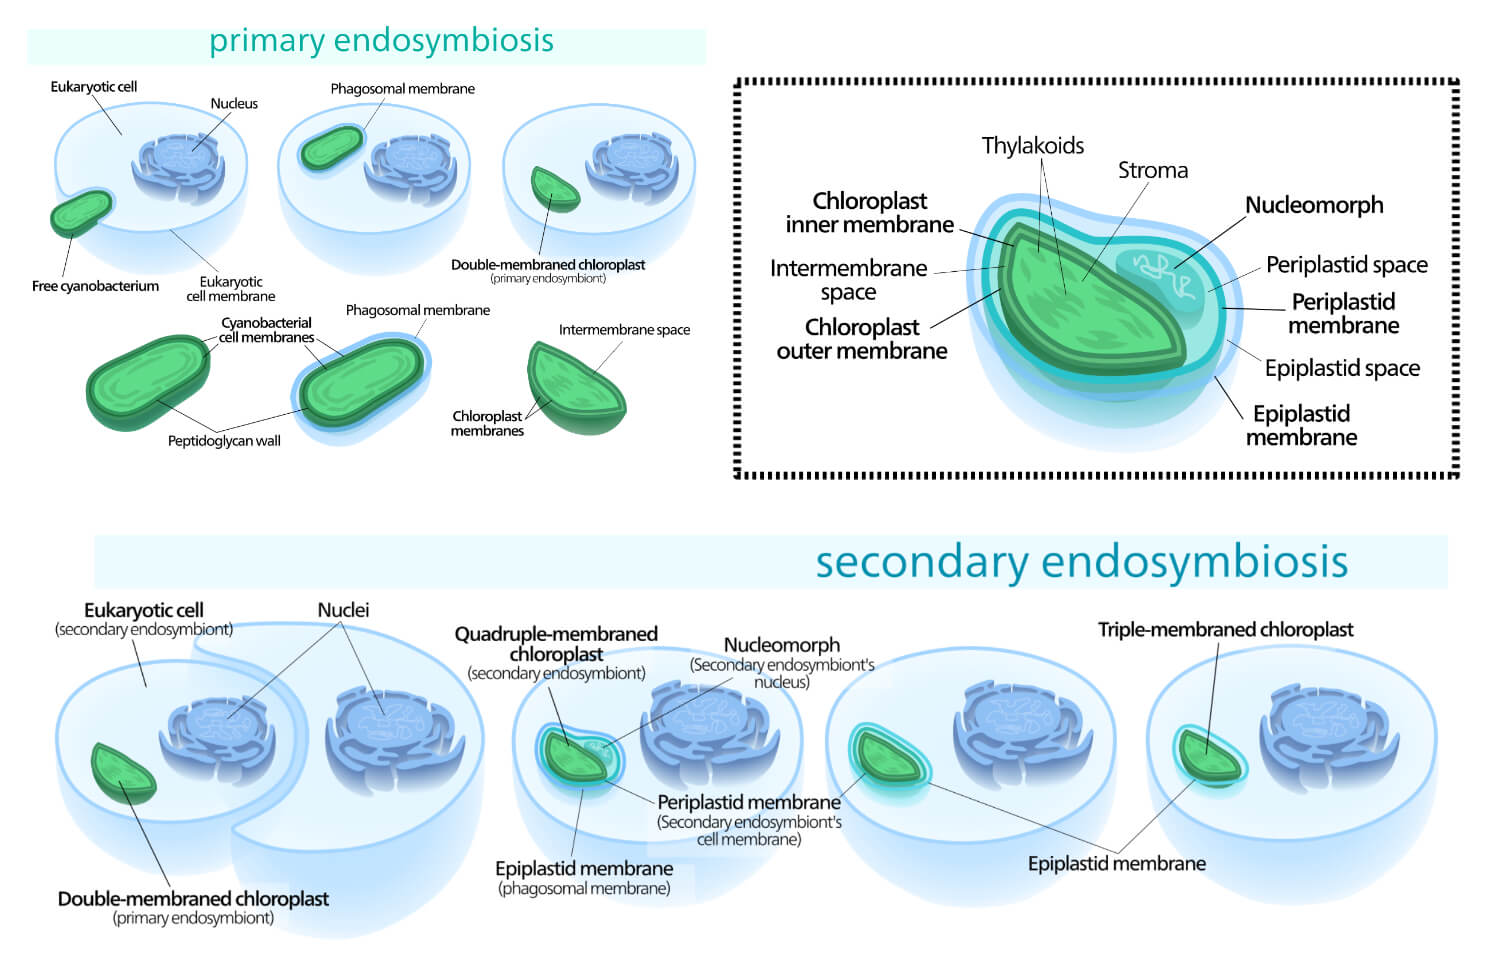 Primary and secondary endosymbiosis of chloroplasts